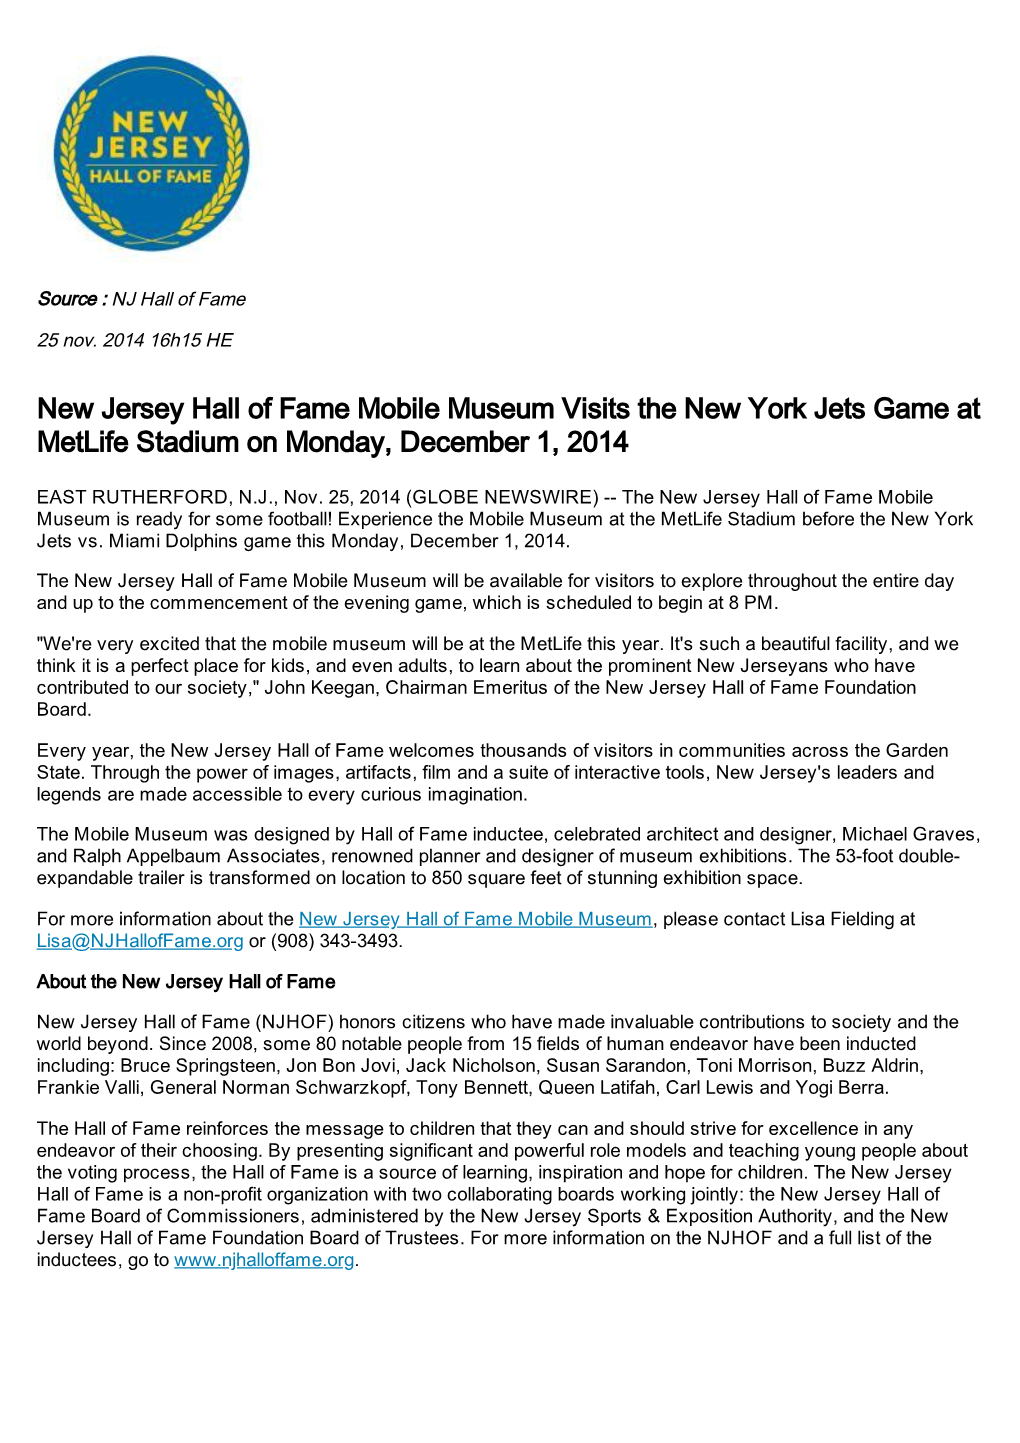 New Jersey Hall of Fame Mobile Museum Visits the New York Jets Game at Metlife Stadium on Monday, December 1, 2014